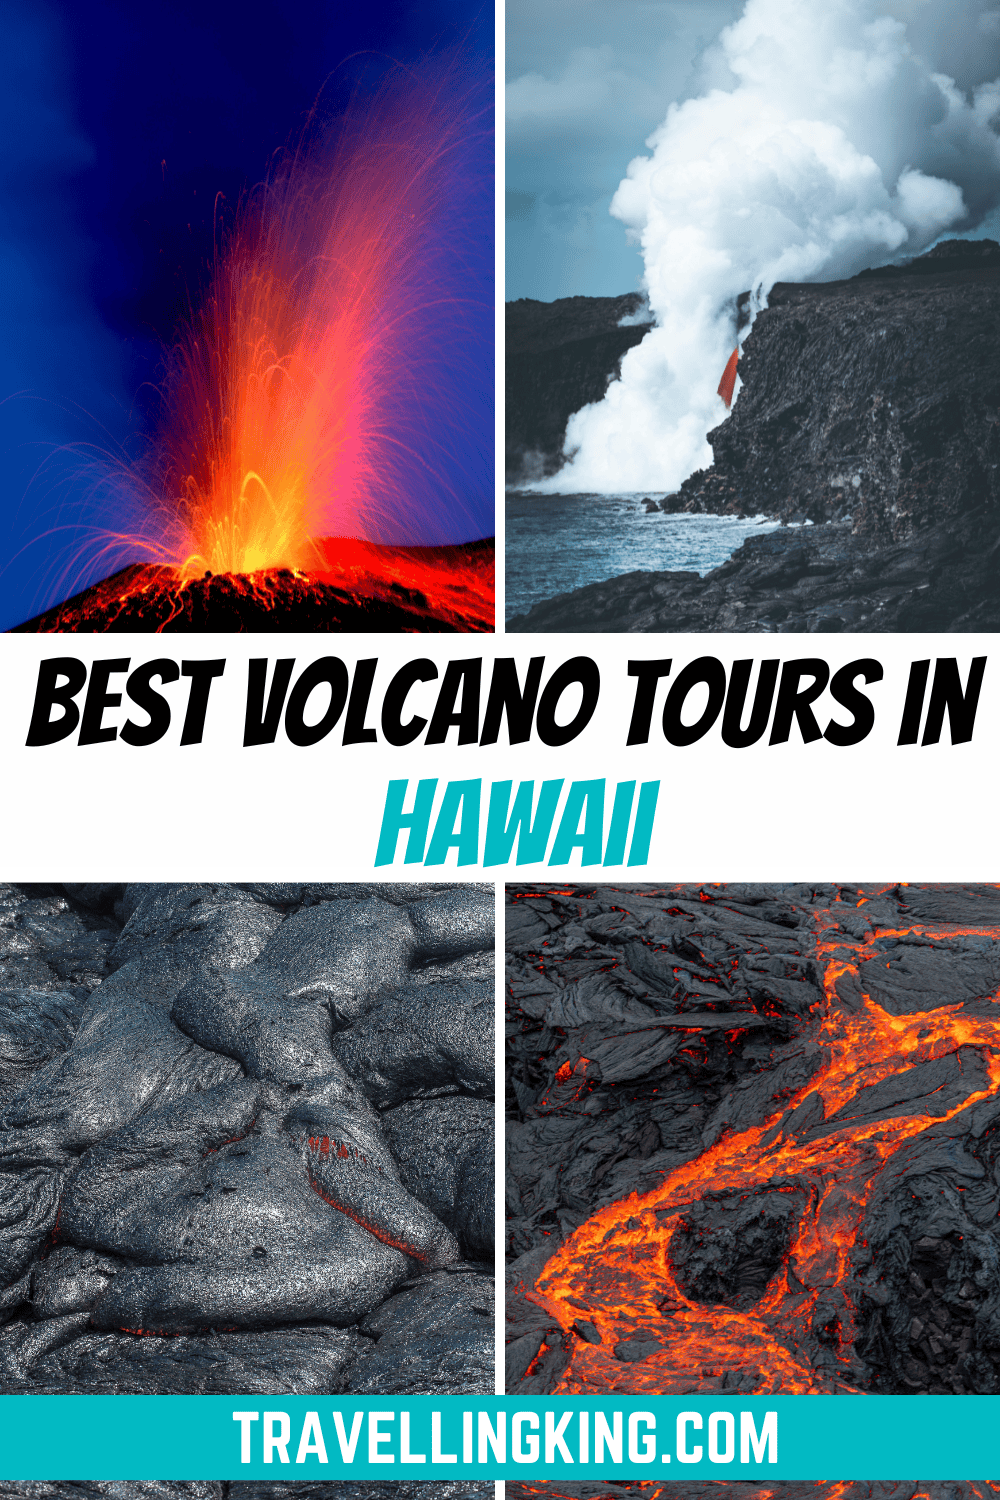 9 of the Best Volcano Tours in Hawaii